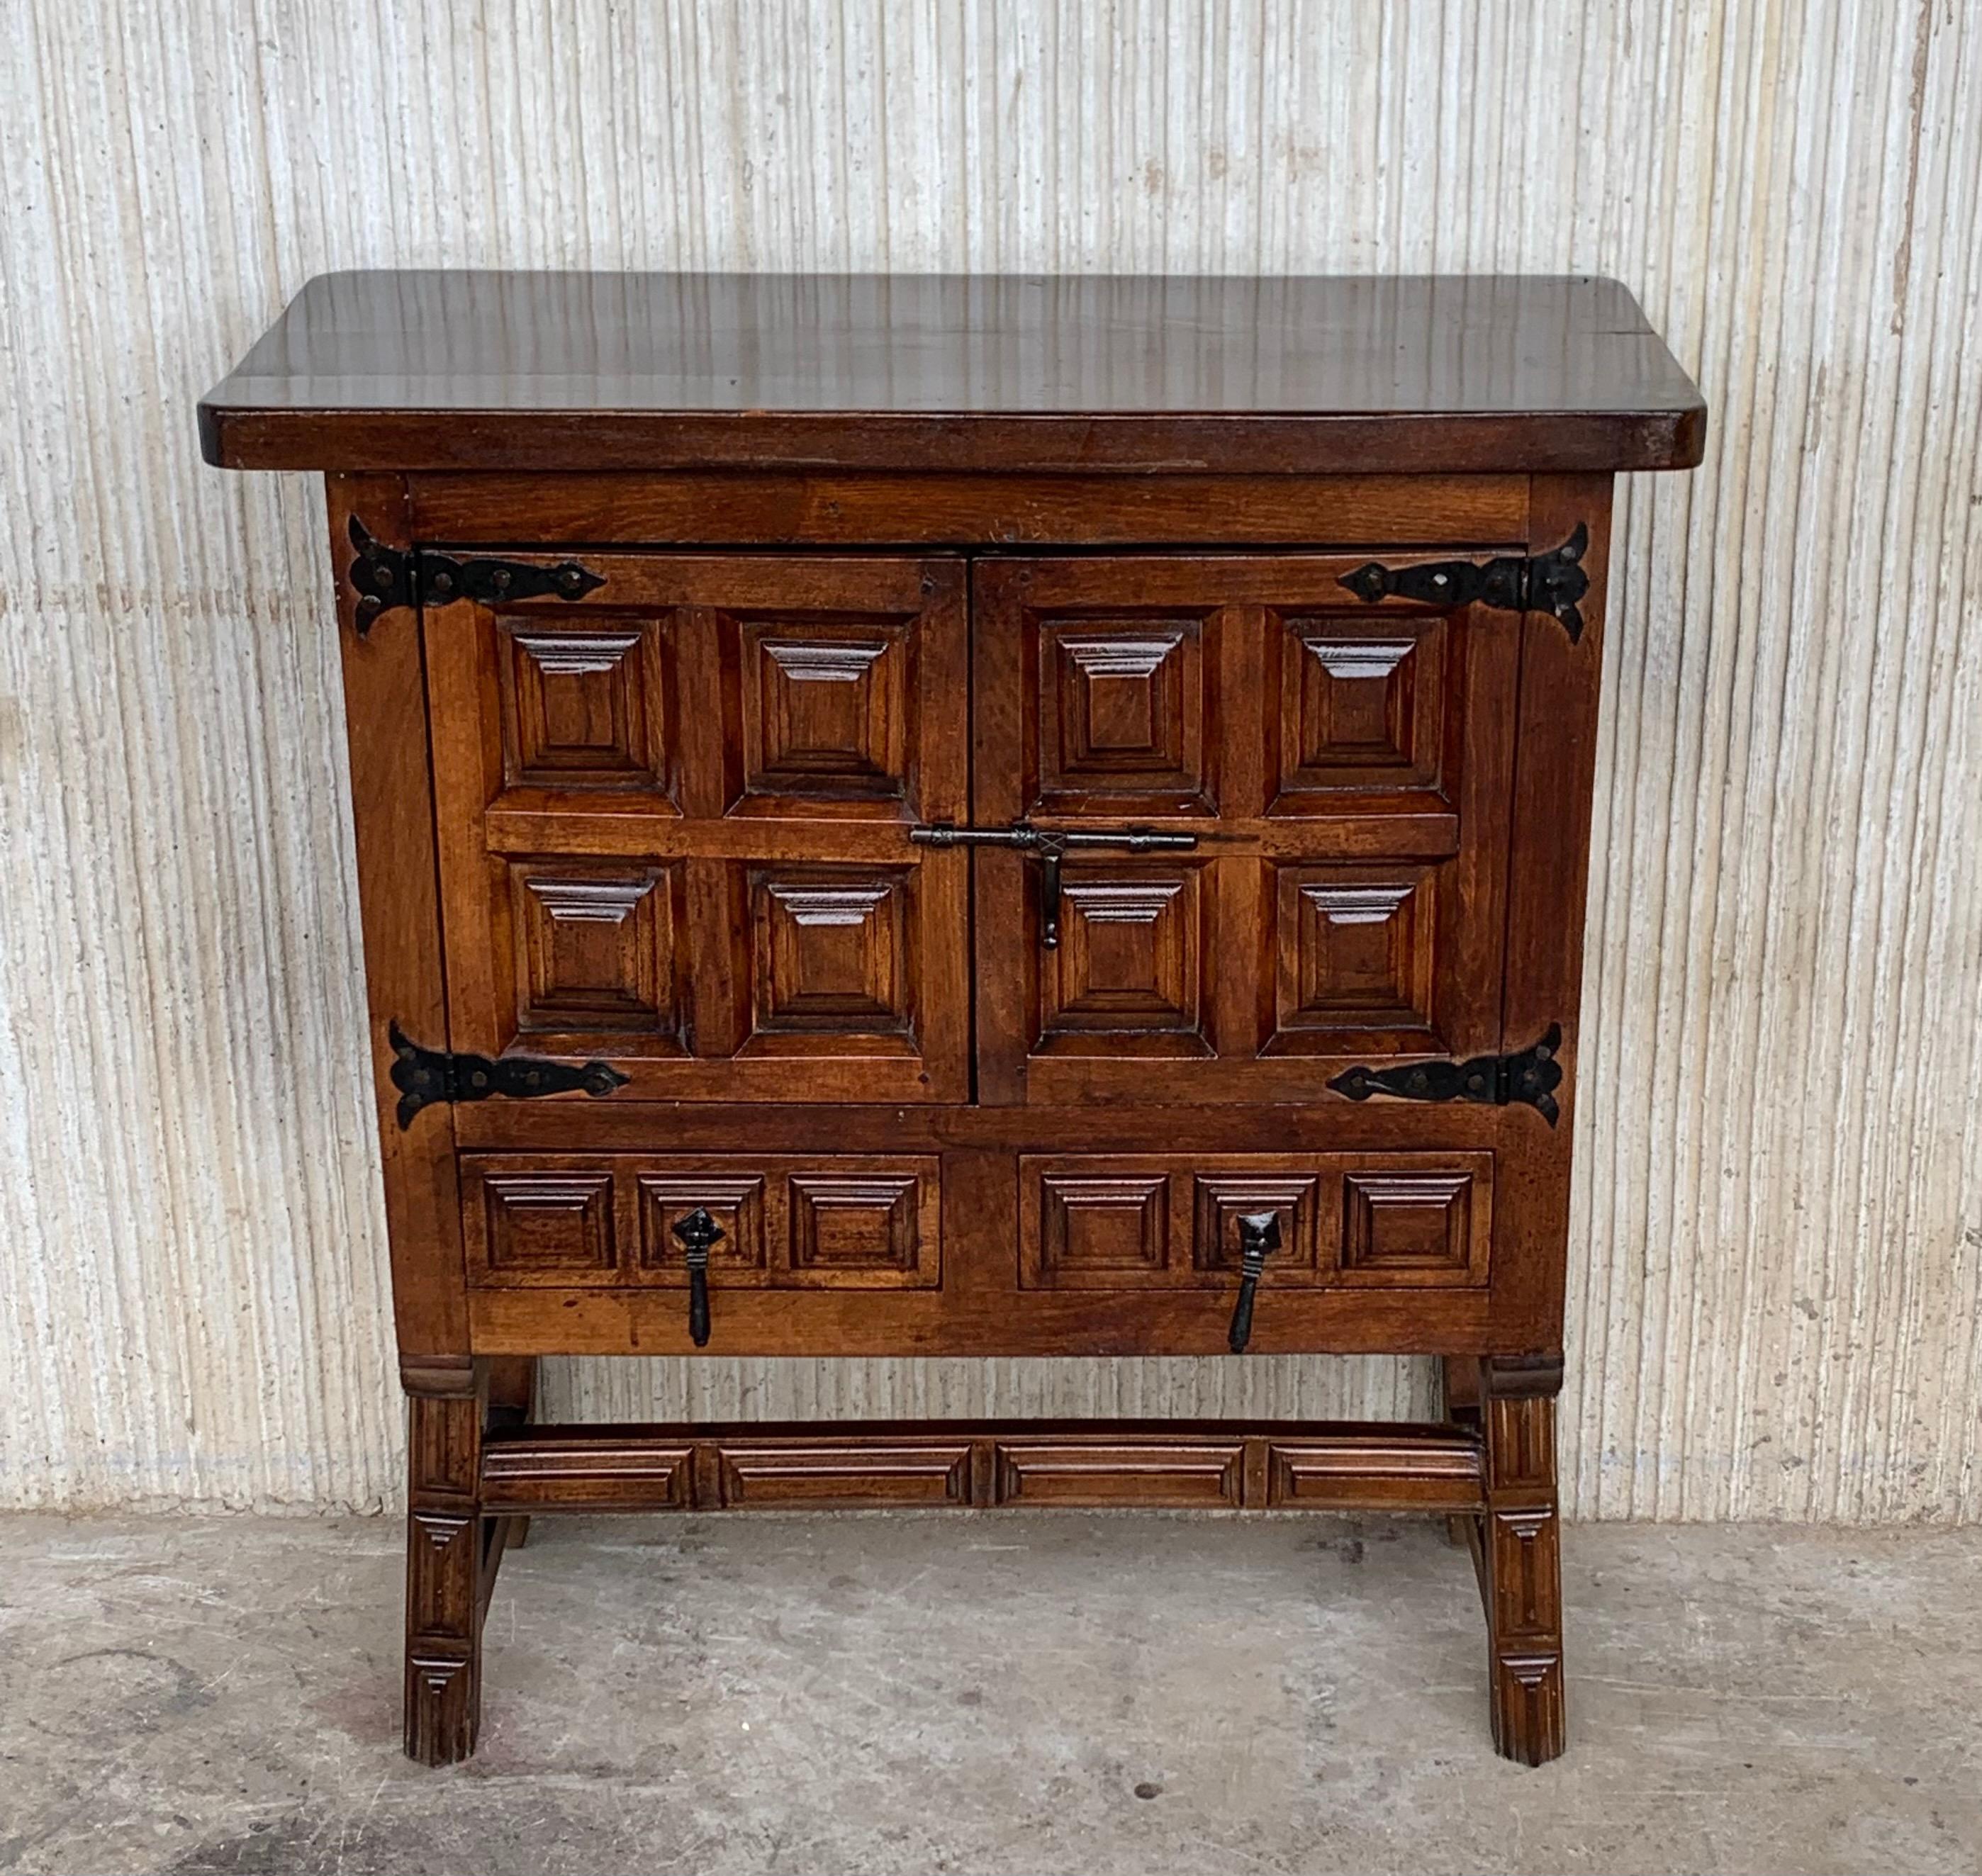 From Northern Spain, constructed of solid walnut, the rectangular top with molded edge atop a conforming case housing two doors paneled with solid walnut, two drawers on the low part and raised on four round legs.
Carved on the molding sides of the